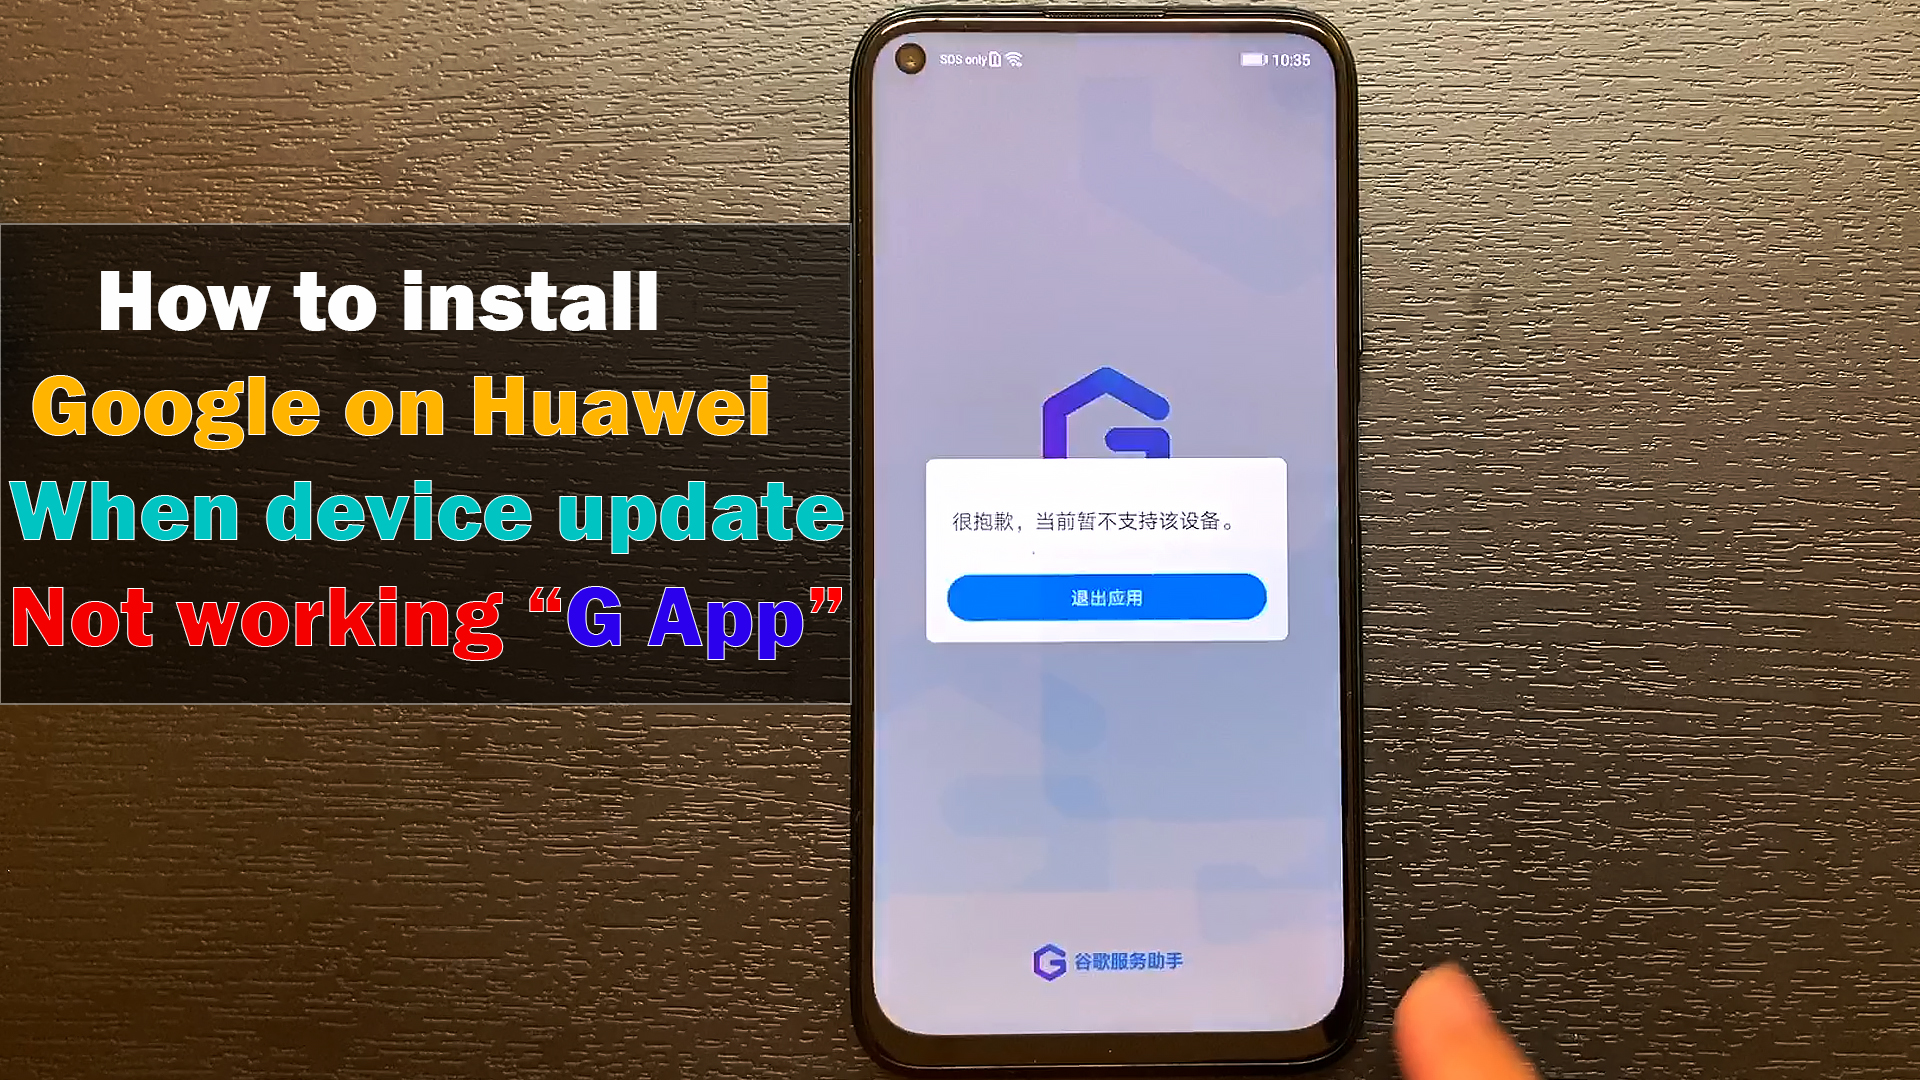 "G App" Not working how to install Google on HUAWEI when ...